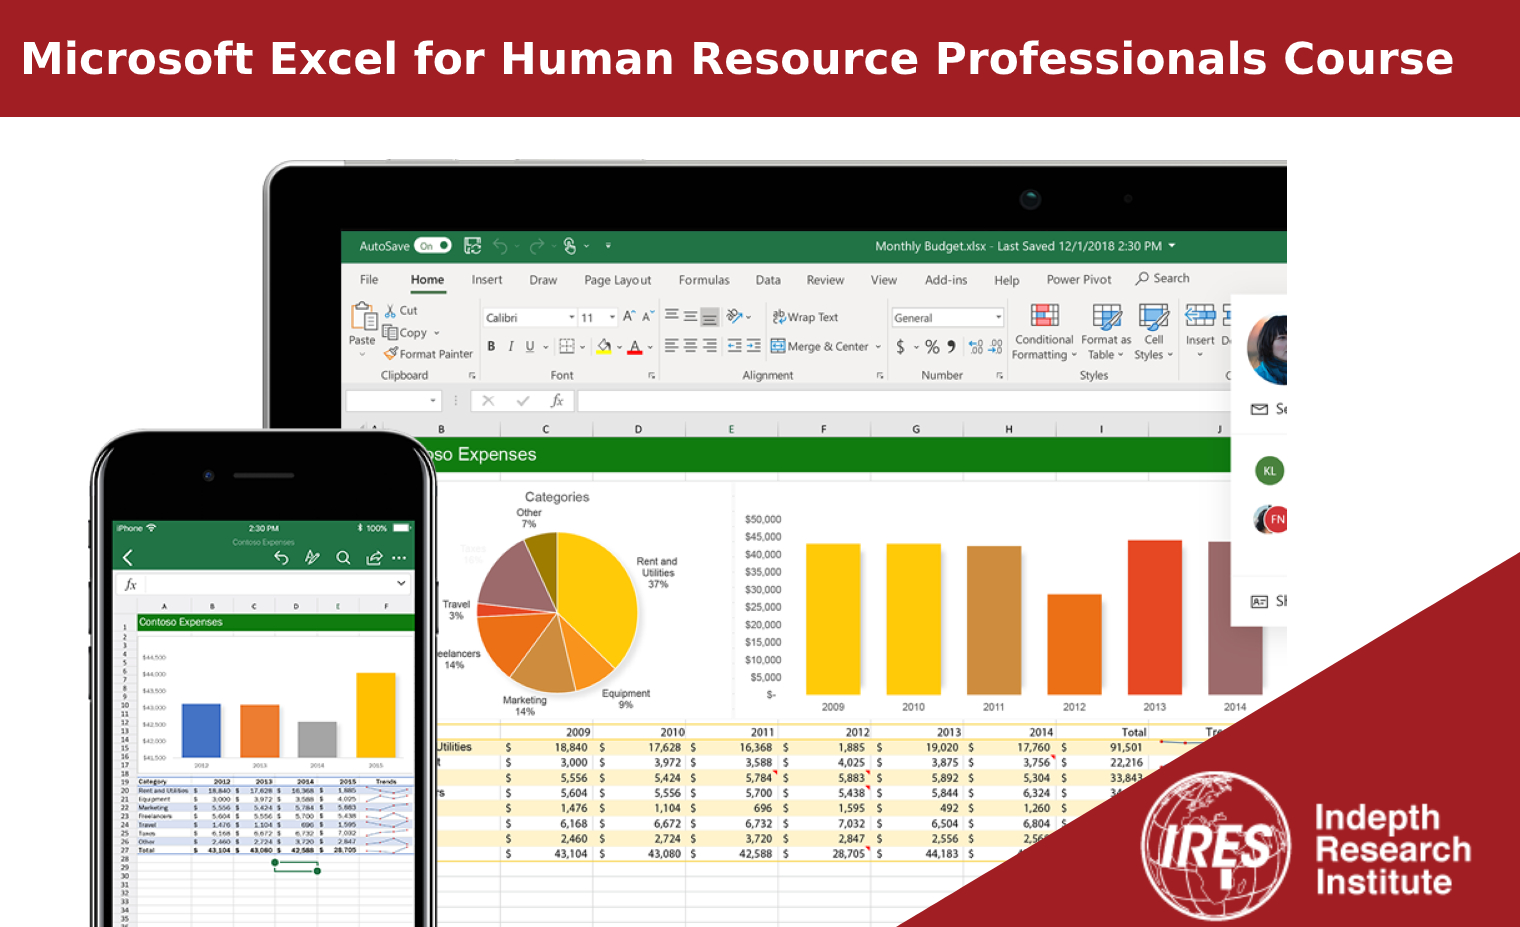 Invitation to Attend Microsoft Excel for Human Resource Professionals Course, Nairobi, Kenya